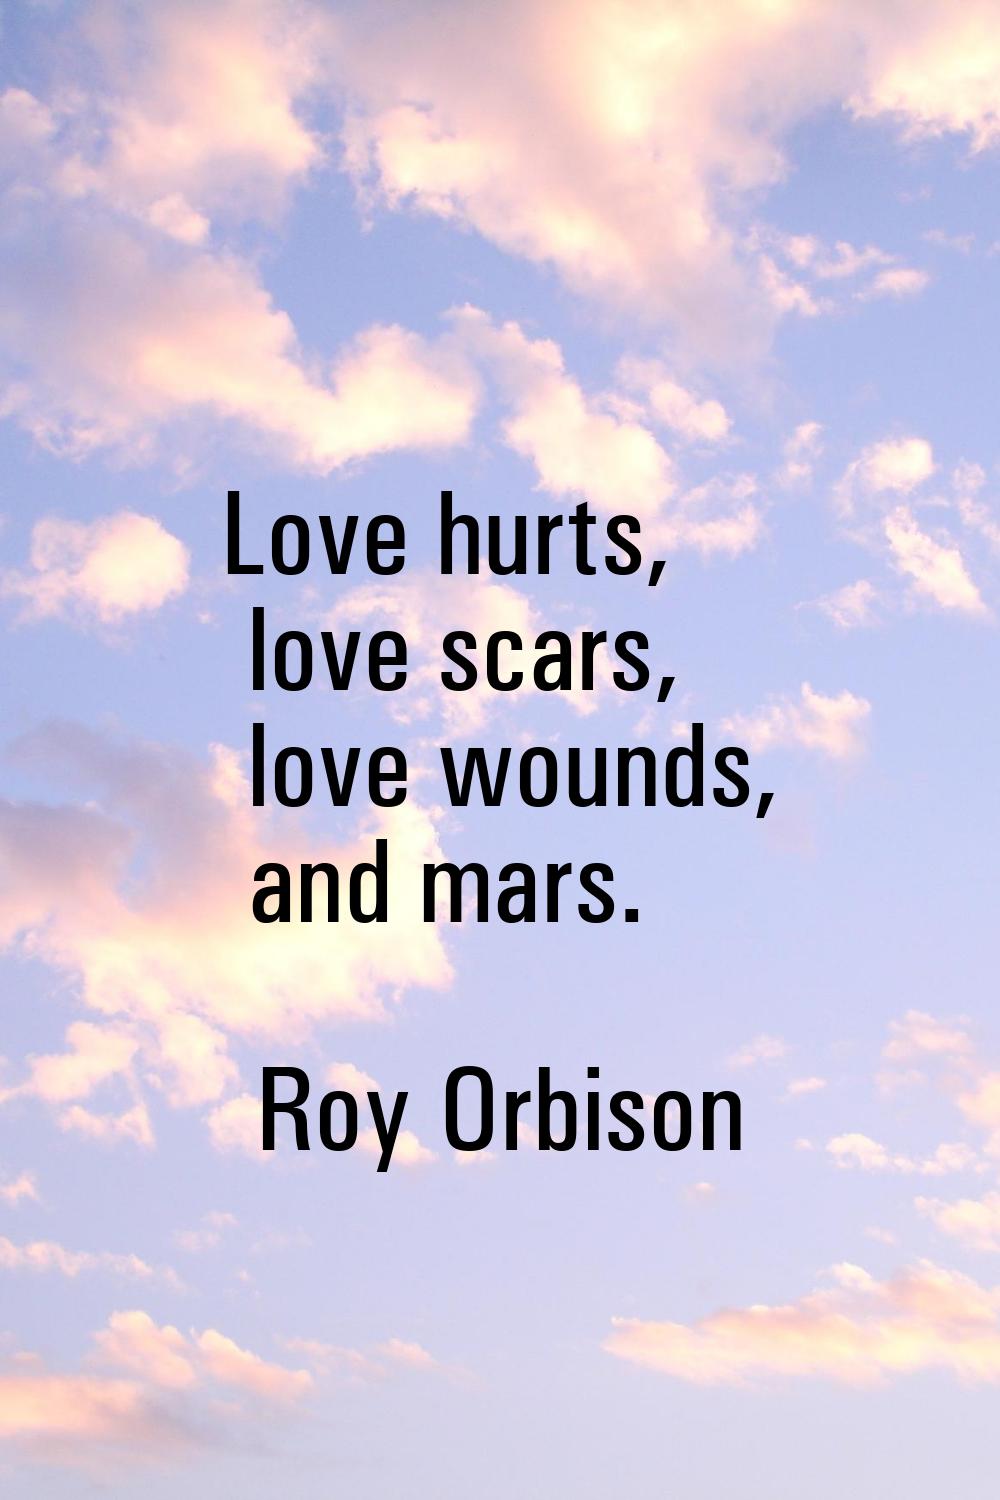 Love hurts, love scars, love wounds, and mars.